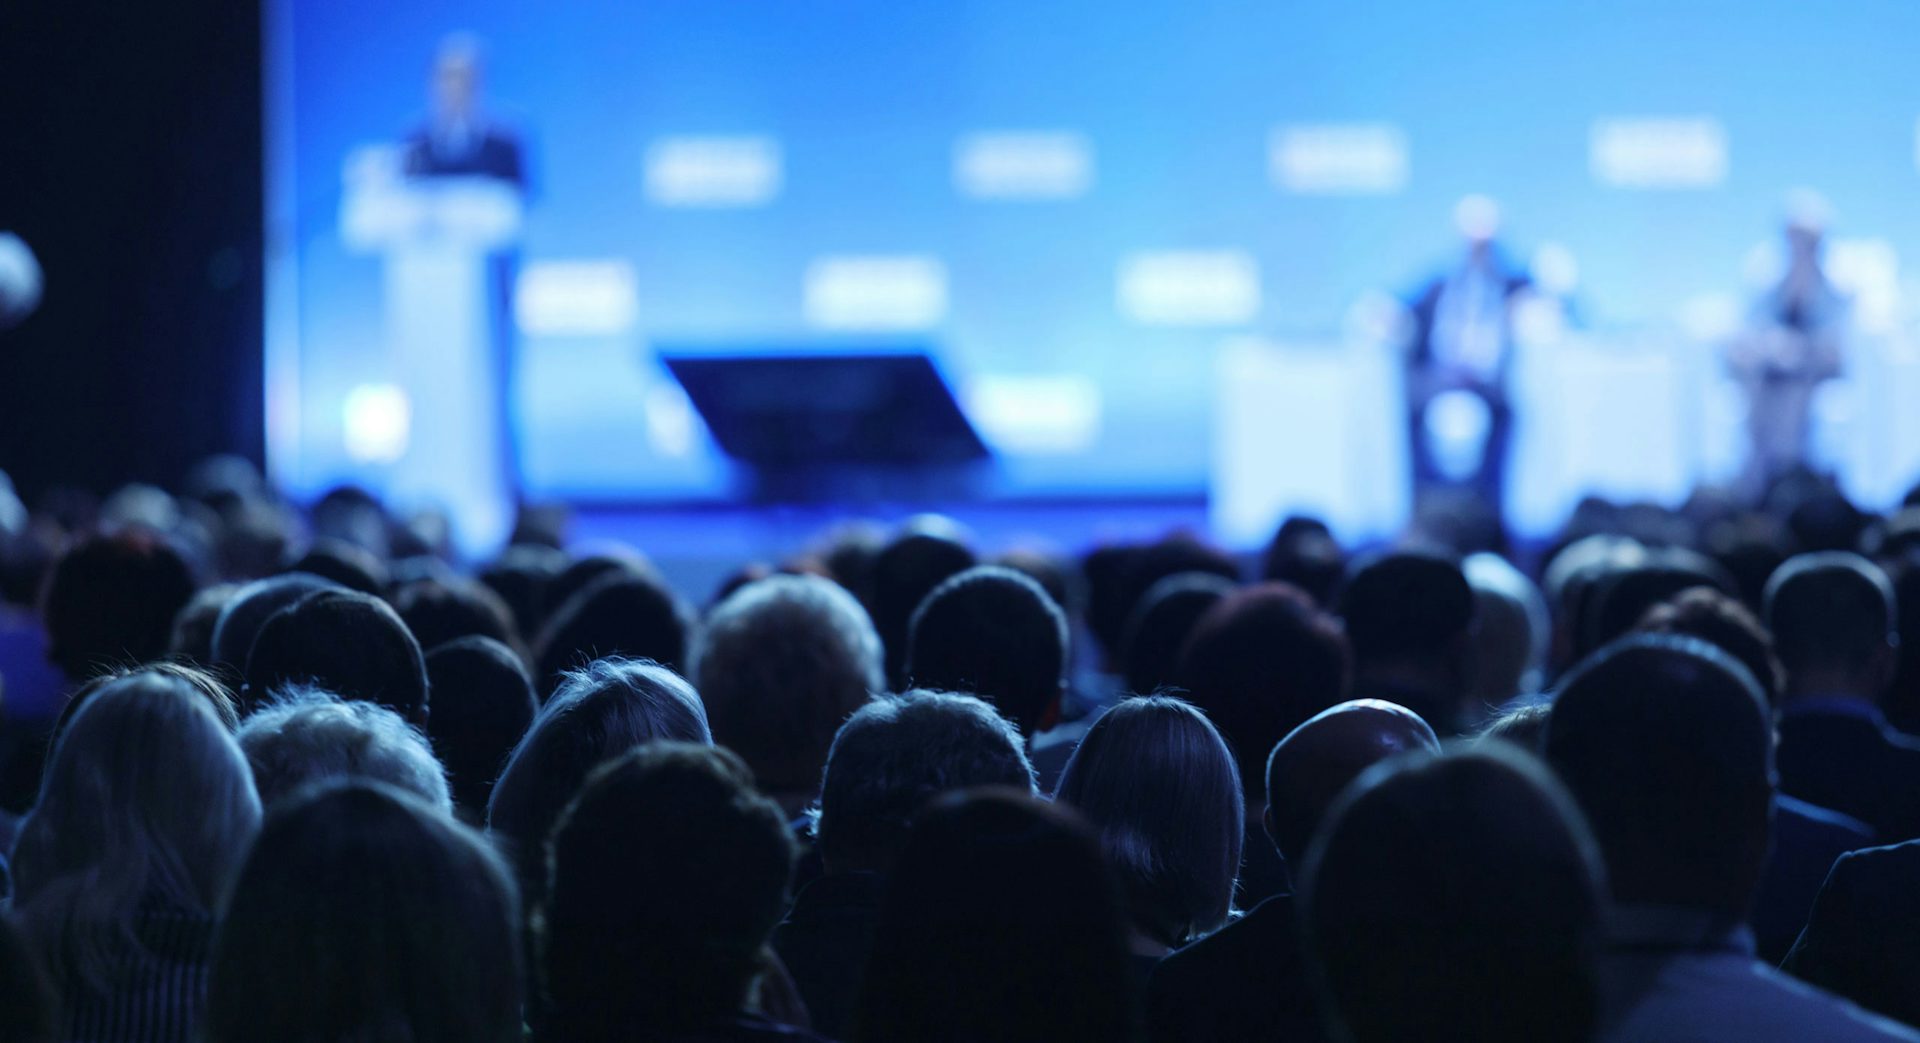 Image of a crowd of people looking at a stage with someone speaking at a podium.